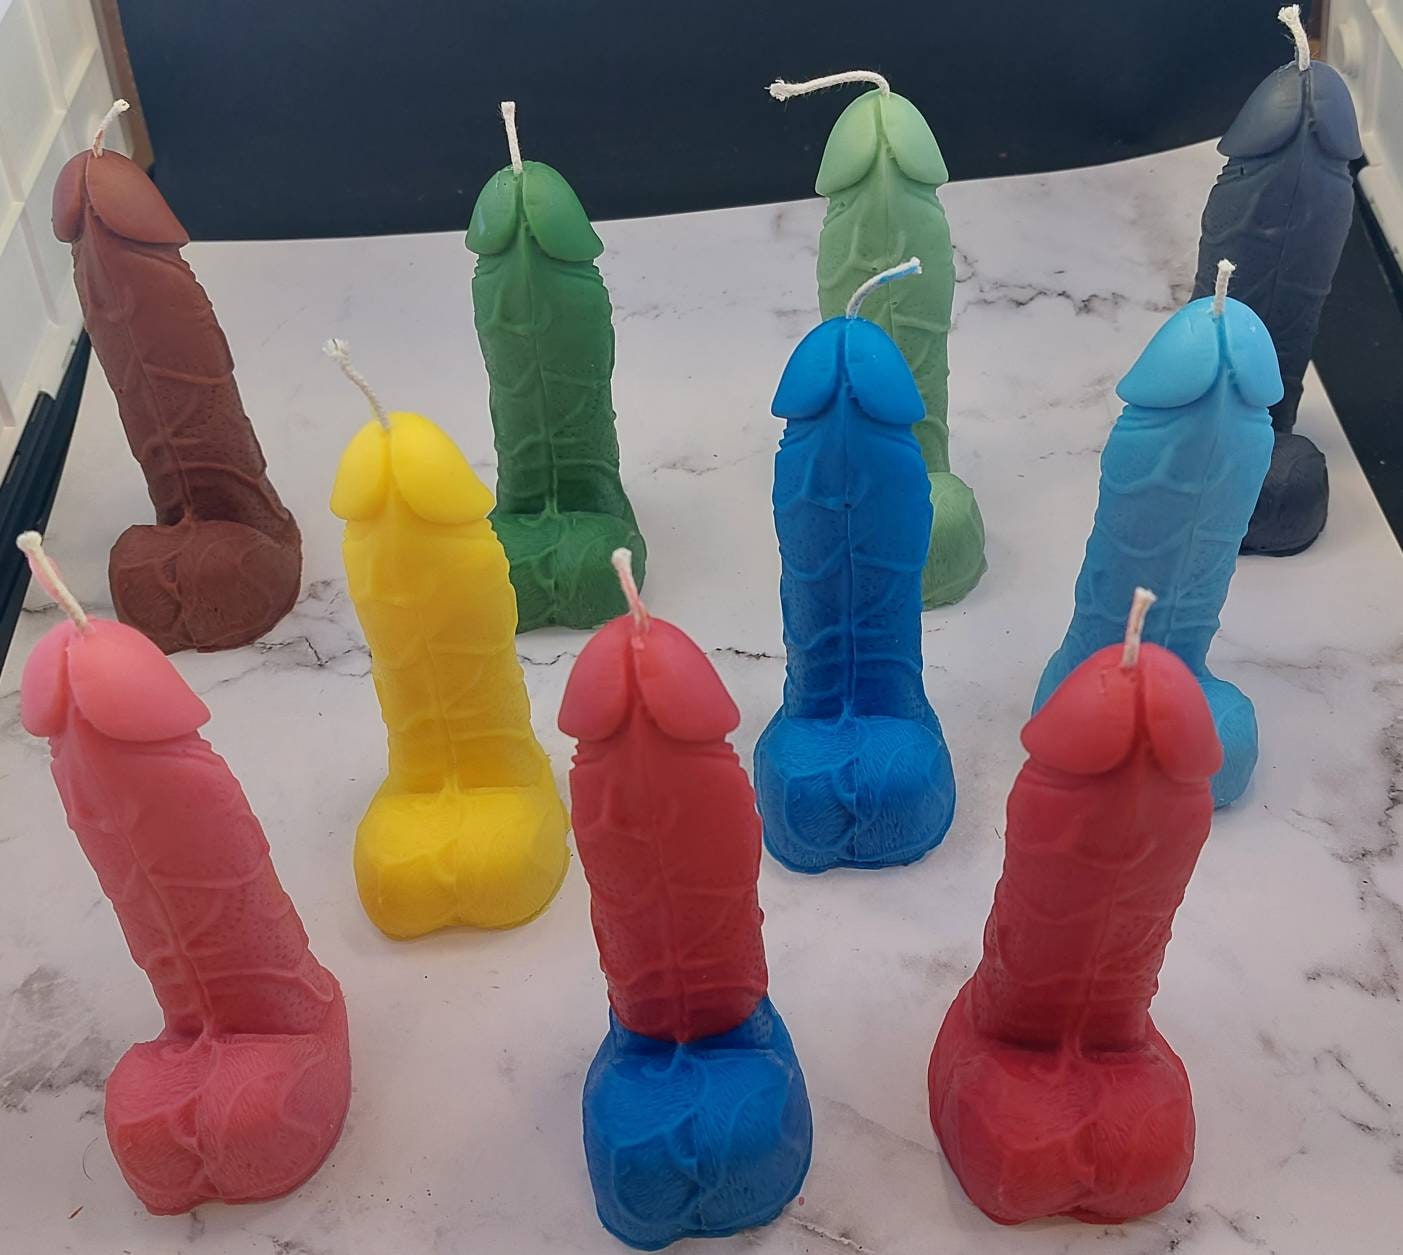 5" (good size) unscented penis candle